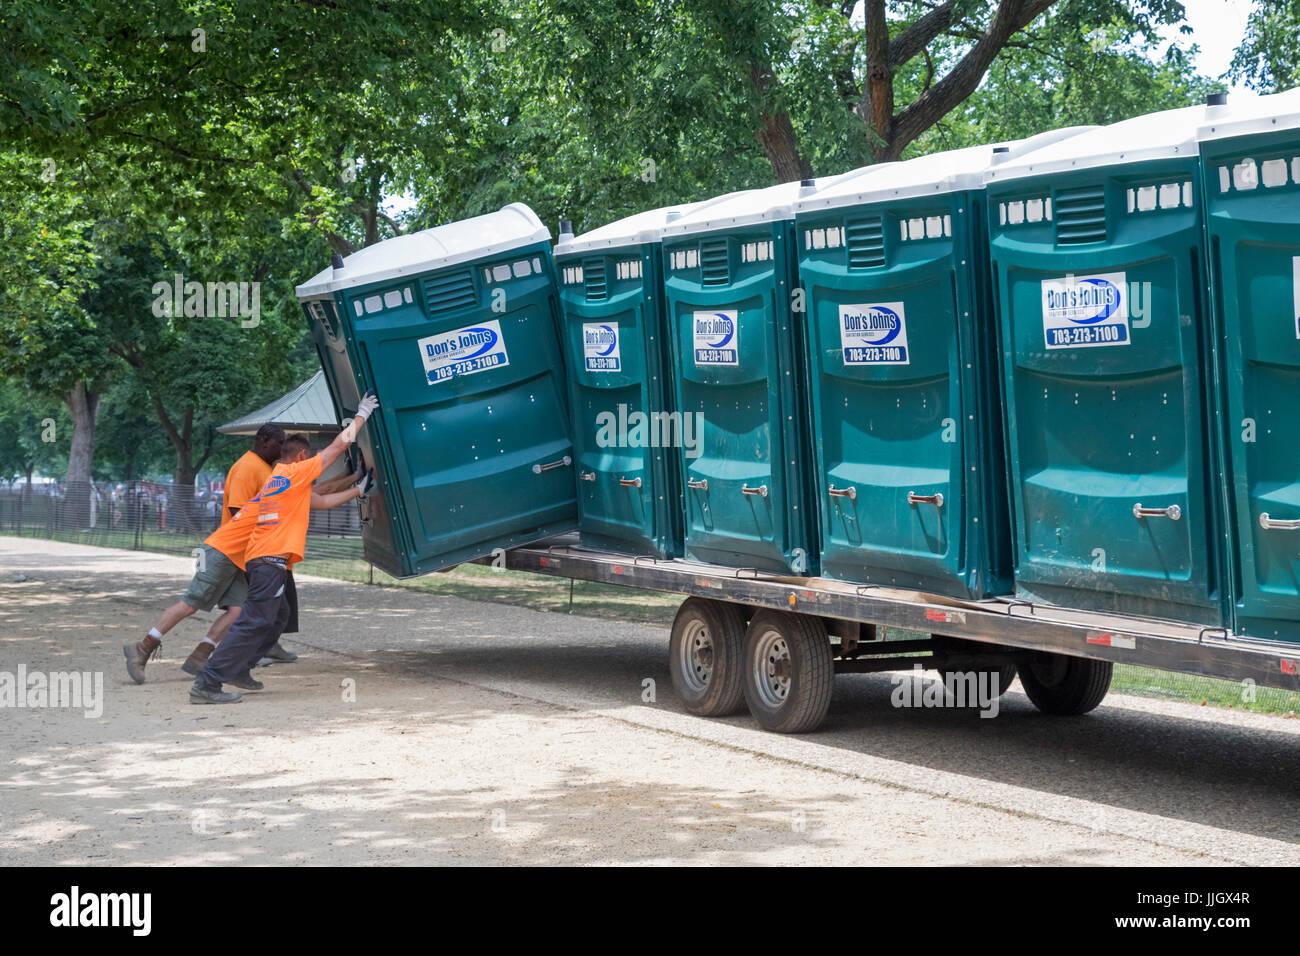 Washington, DC - Workers load portable toilets on a truck after an event on the national mall. Stock Photo